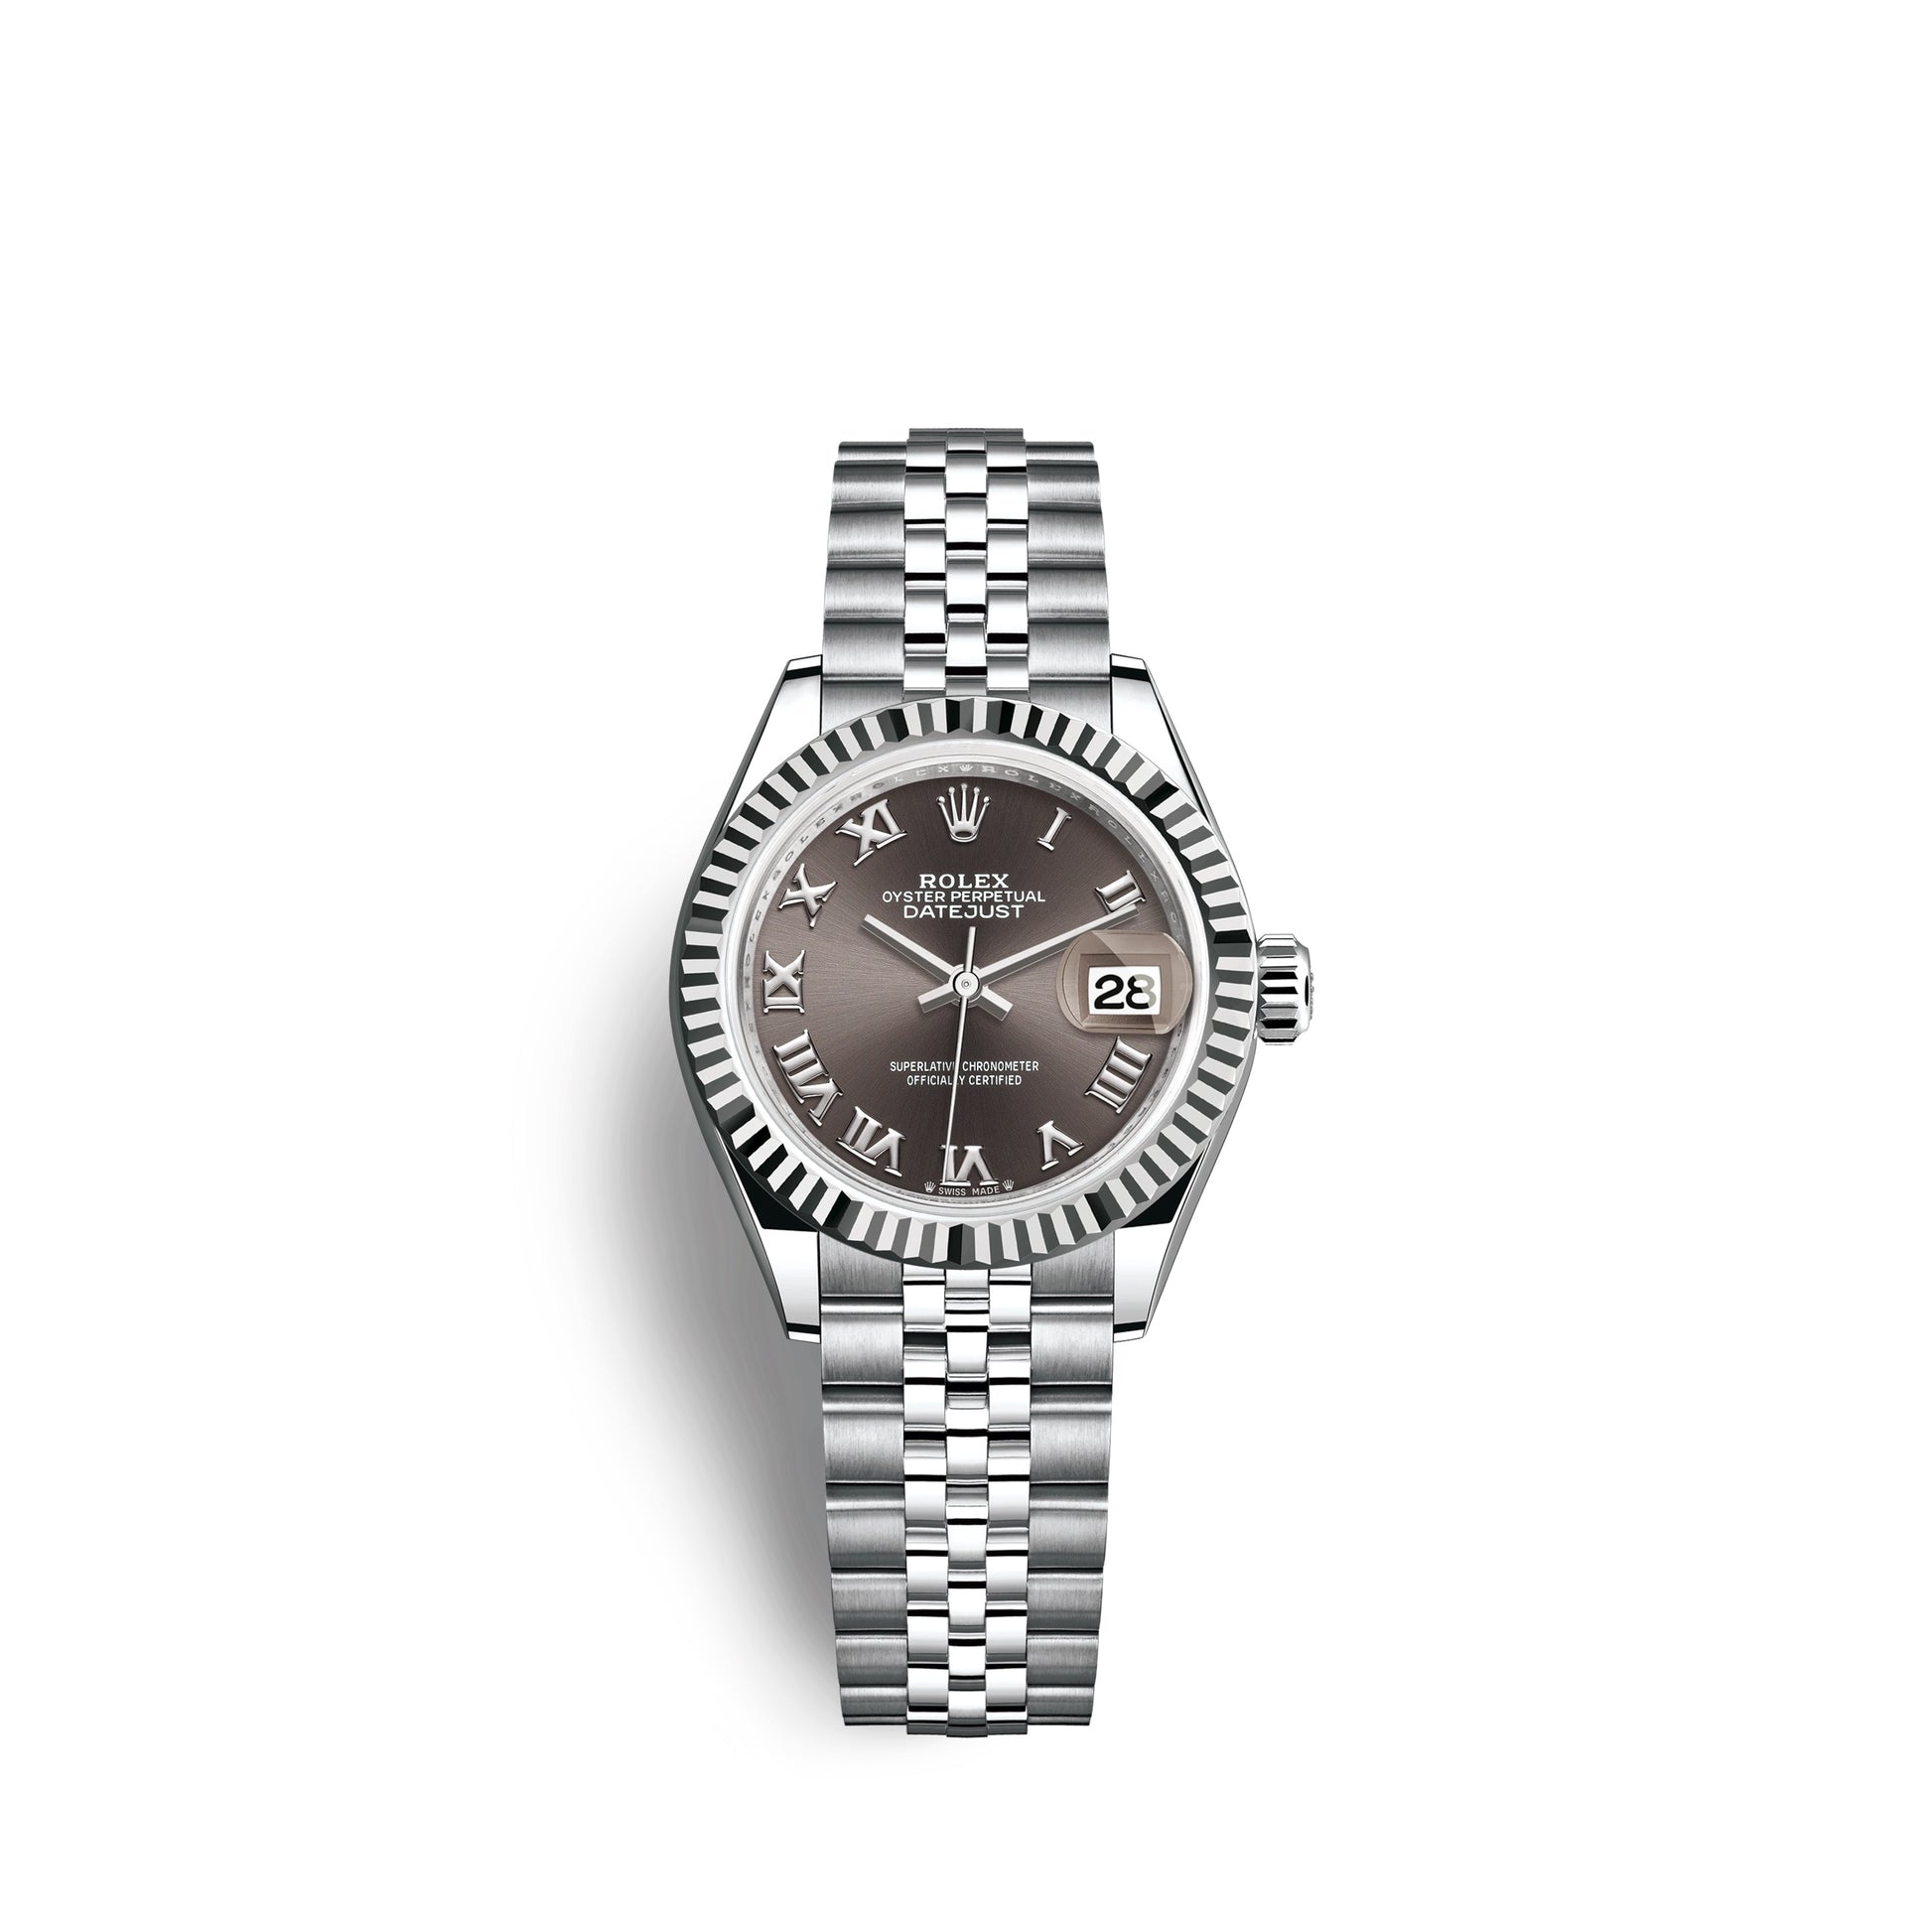 Rolex Lady-Datejust 28, Oystersteel and 18k White Gold, Ref# 279174-0013